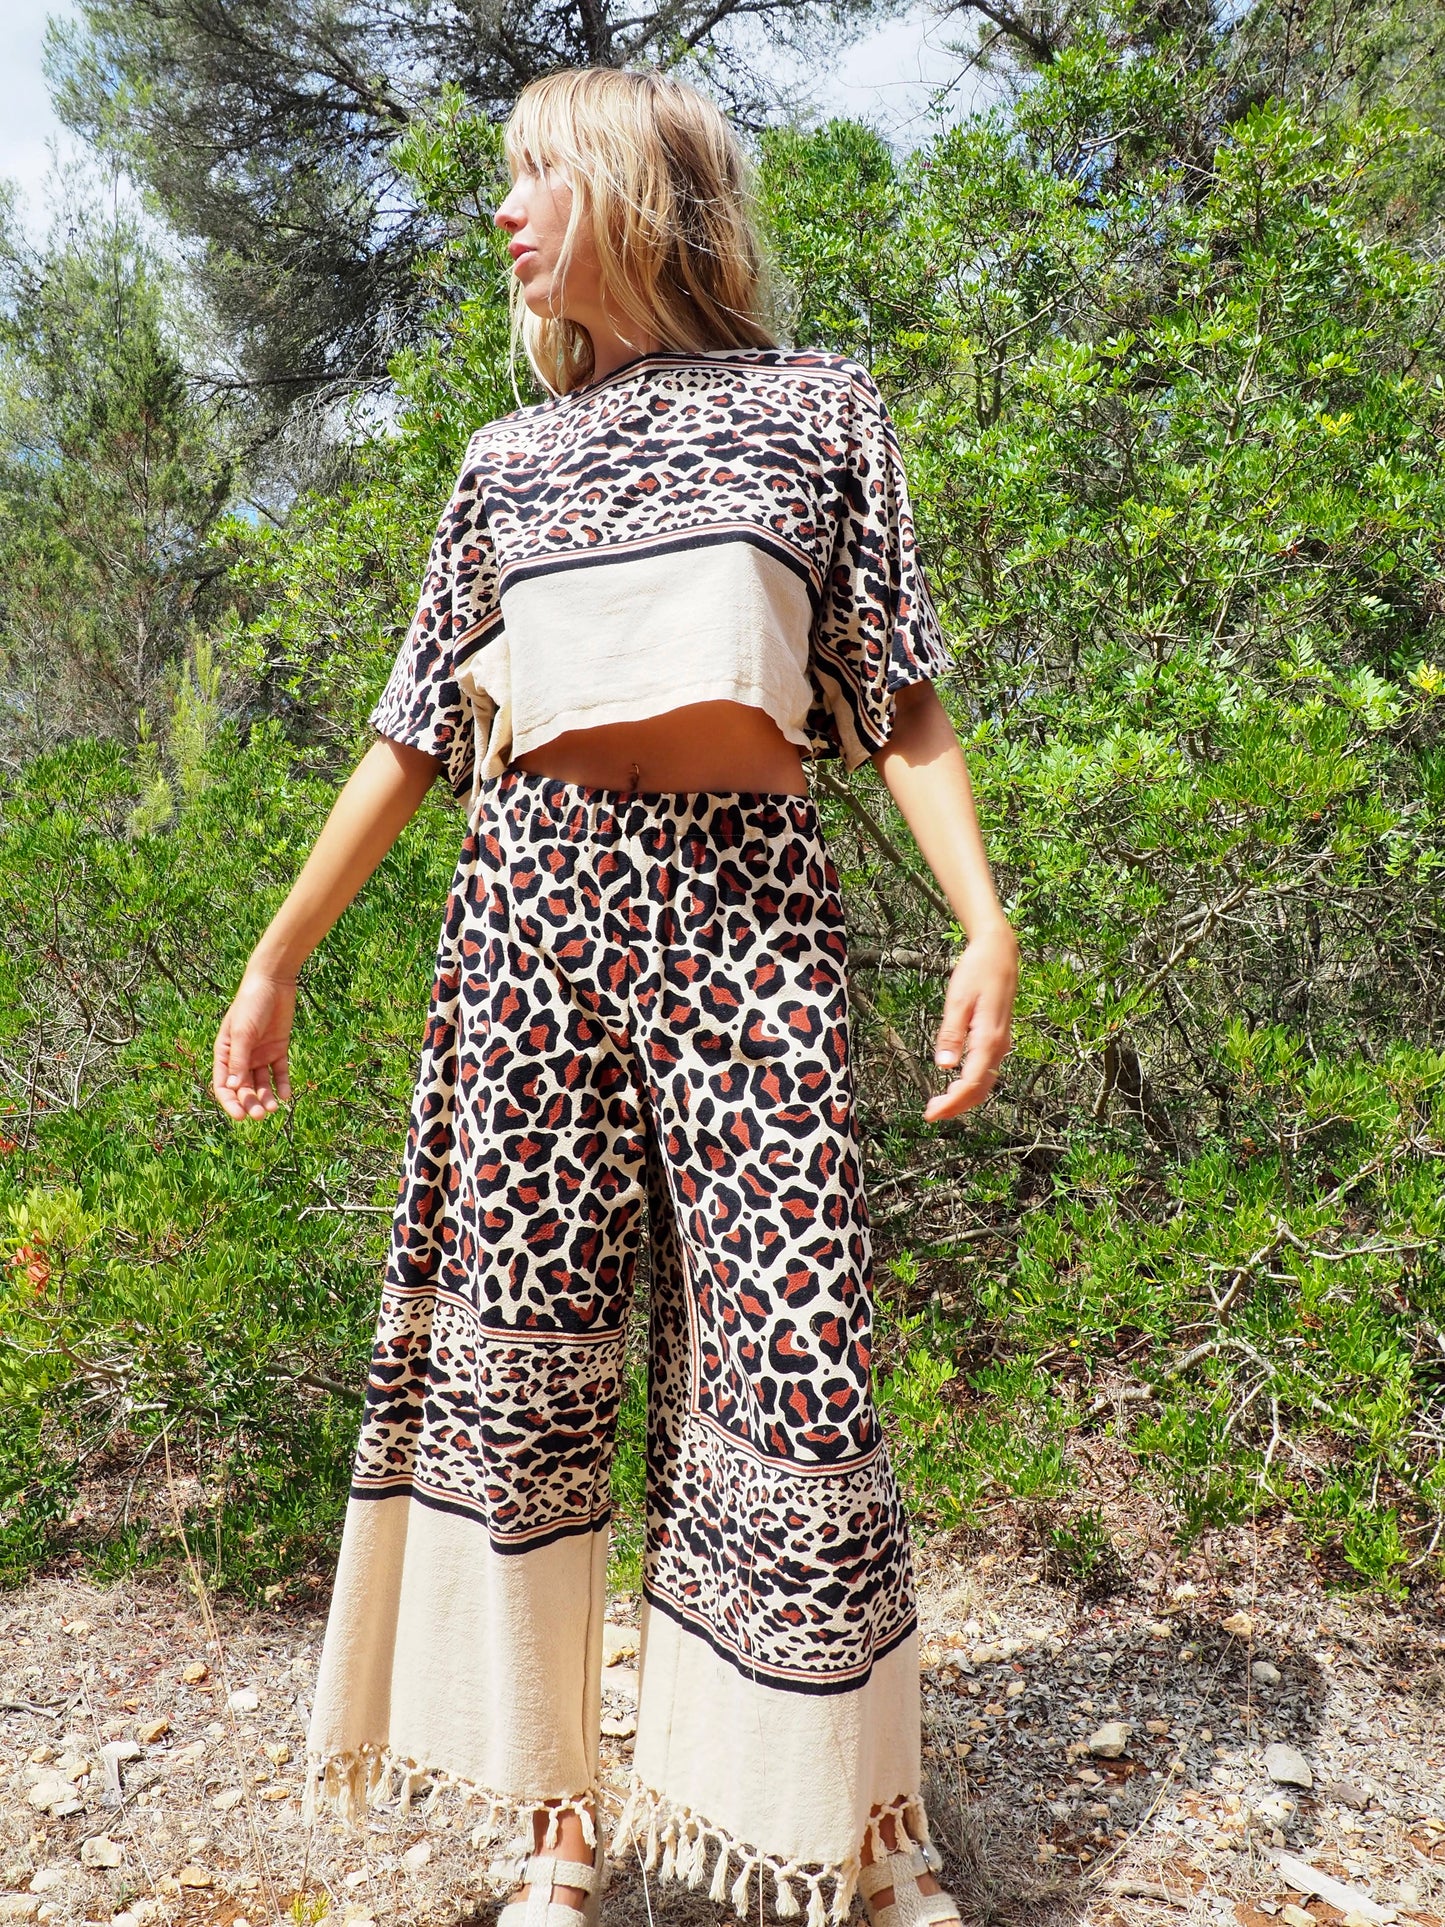 Up-cycled cotton black and cream animal print cropped top with sleeves made by Vagabond Ibiza